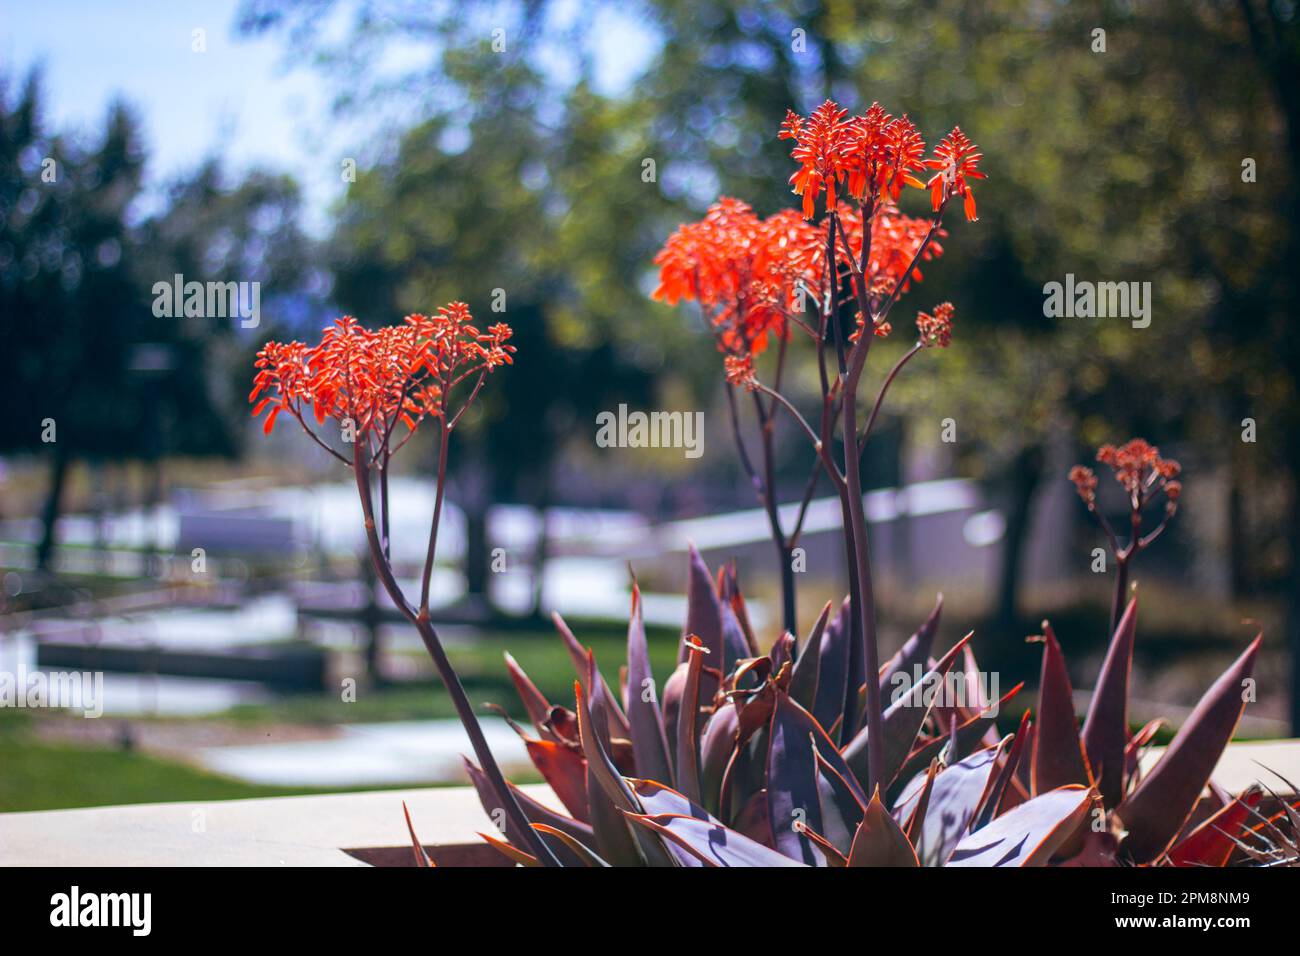 Explore the vibrant beauty of Coral Aloe (Aloe striata) in full bloom at Crafton Hills College. Admire the clusters of coral-orange flowers on this su Stock Photo